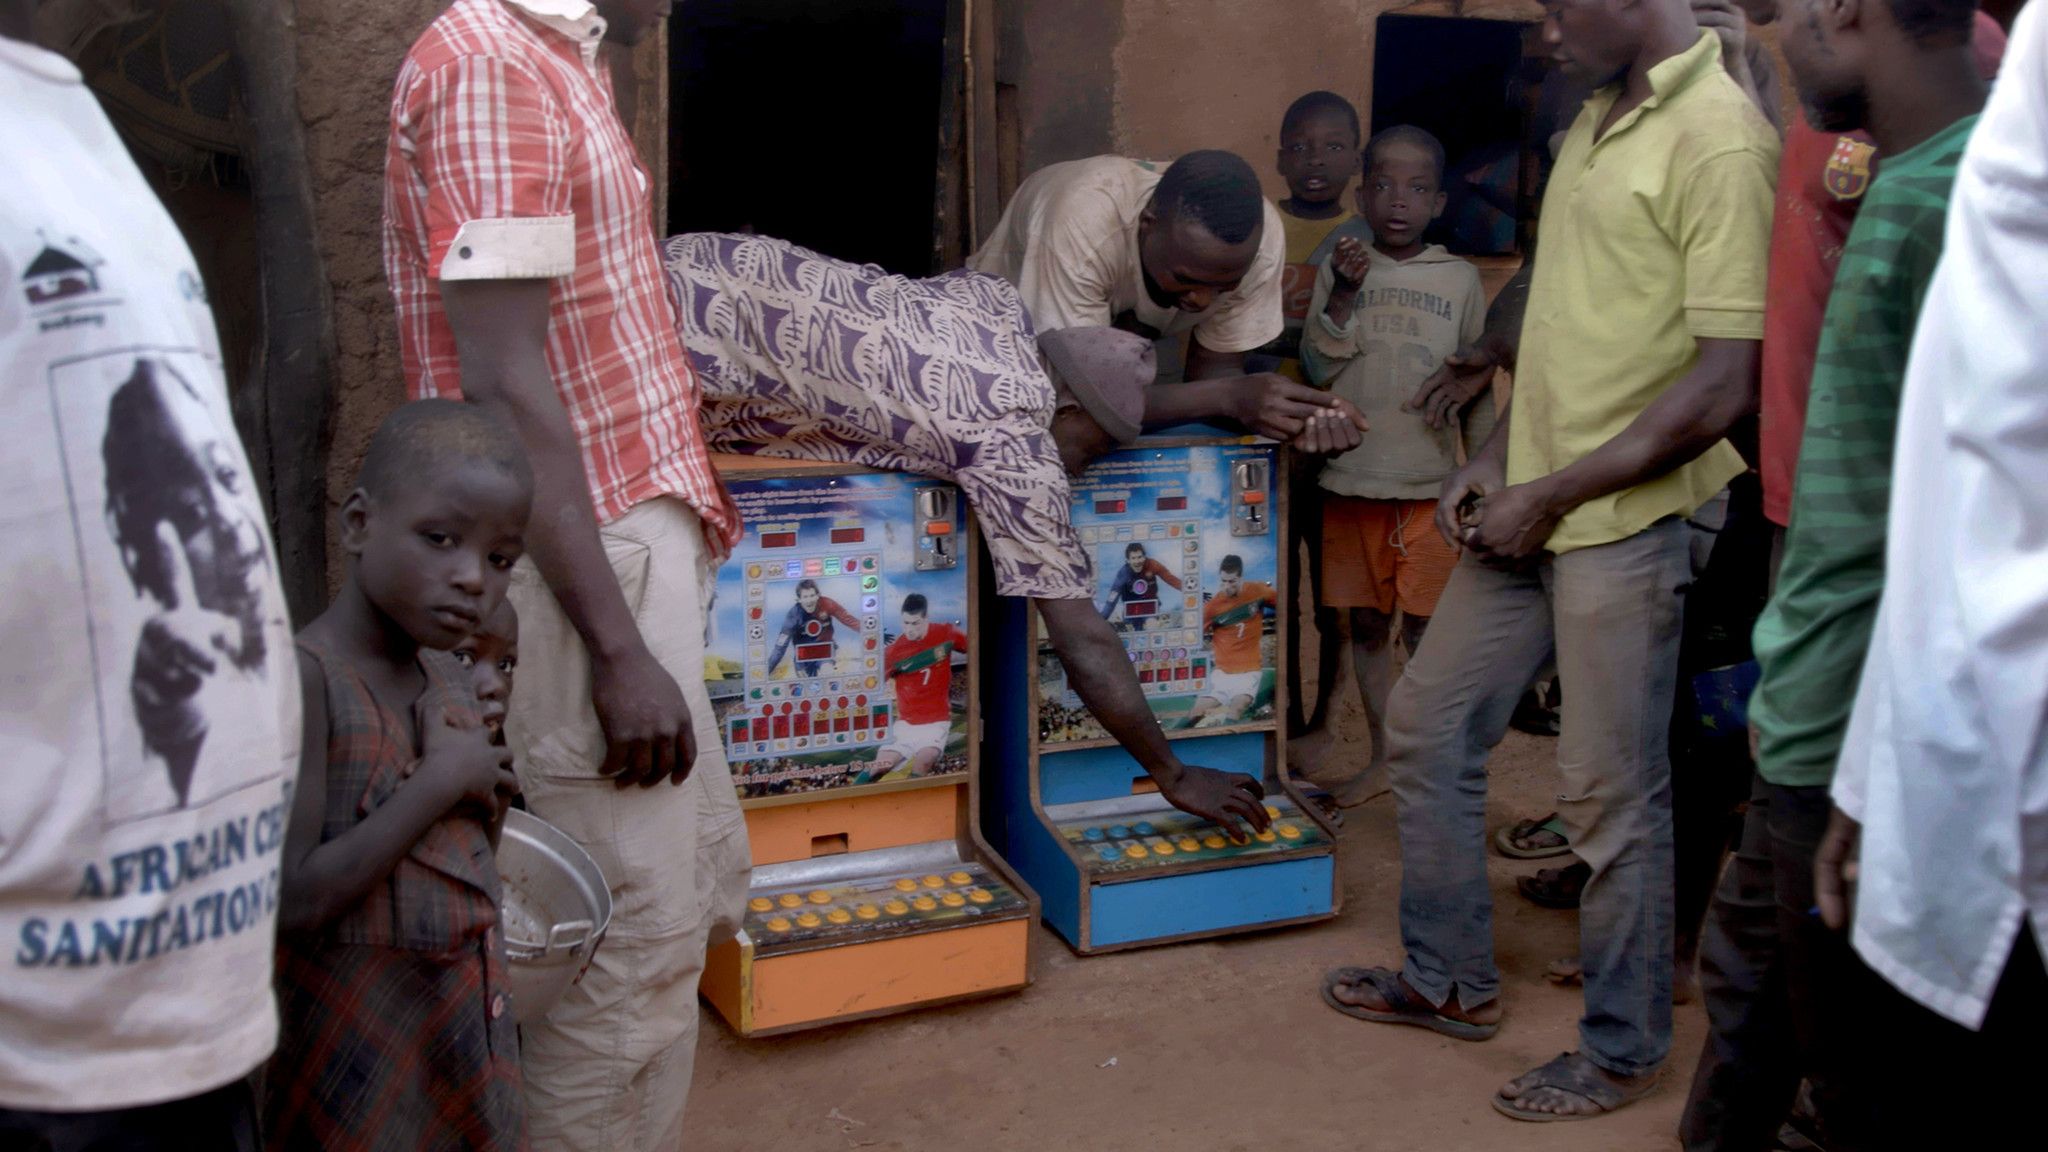 Villagers bring two gambling machines out from a hut in Zamashegu, in Ghana's Northern Region. Image by Noah Fowler. Ghana, 2017.